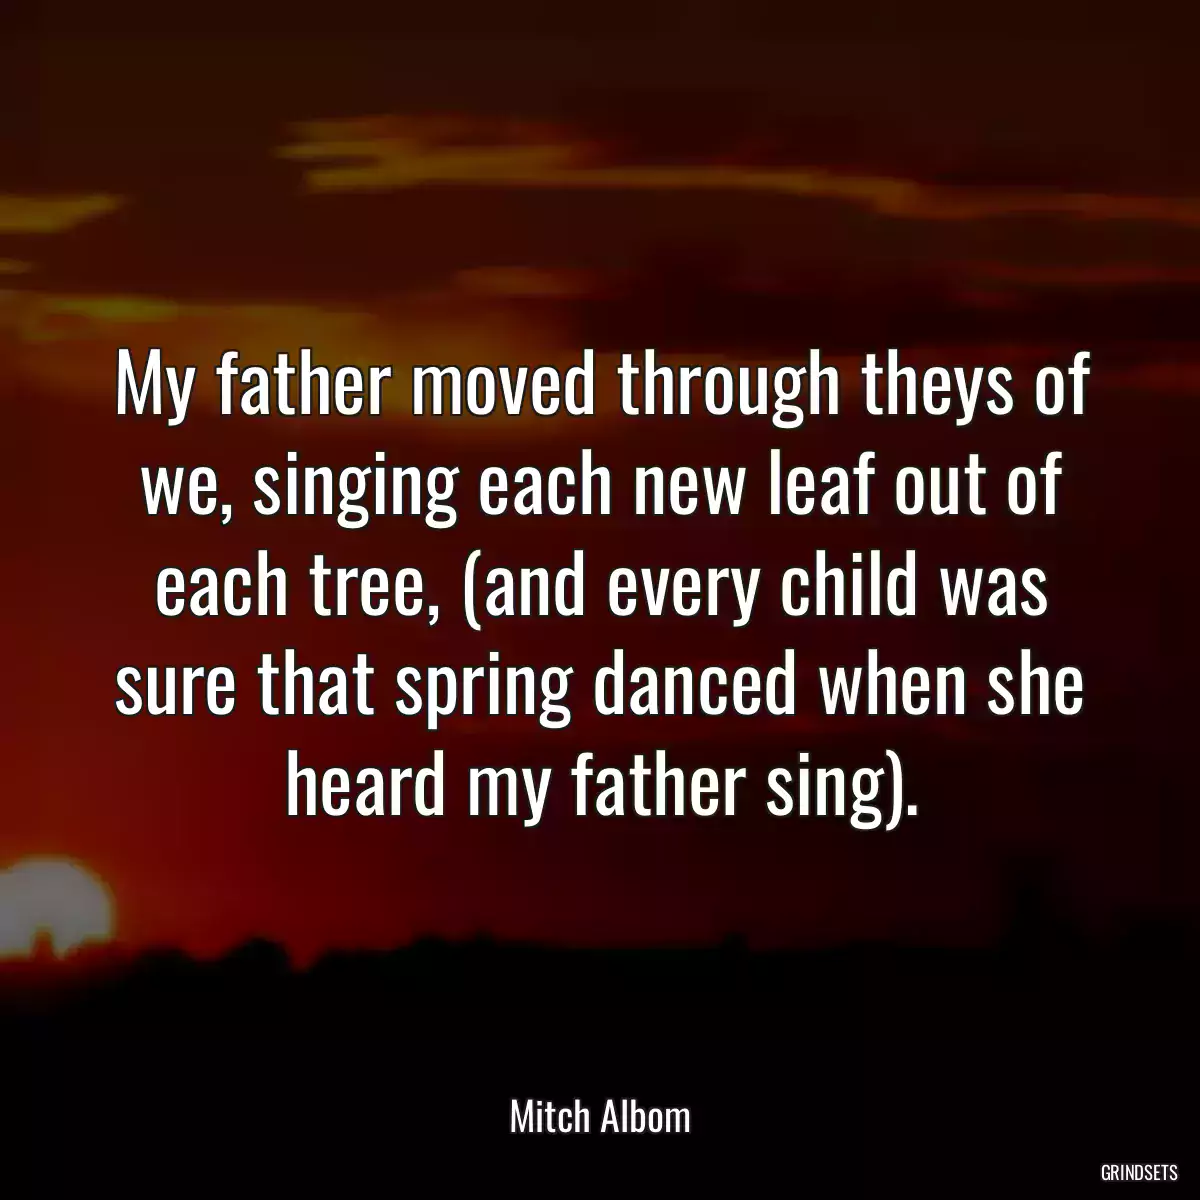 My father moved through theys of we, singing each new leaf out of each tree, (and every child was sure that spring danced when she heard my father sing).